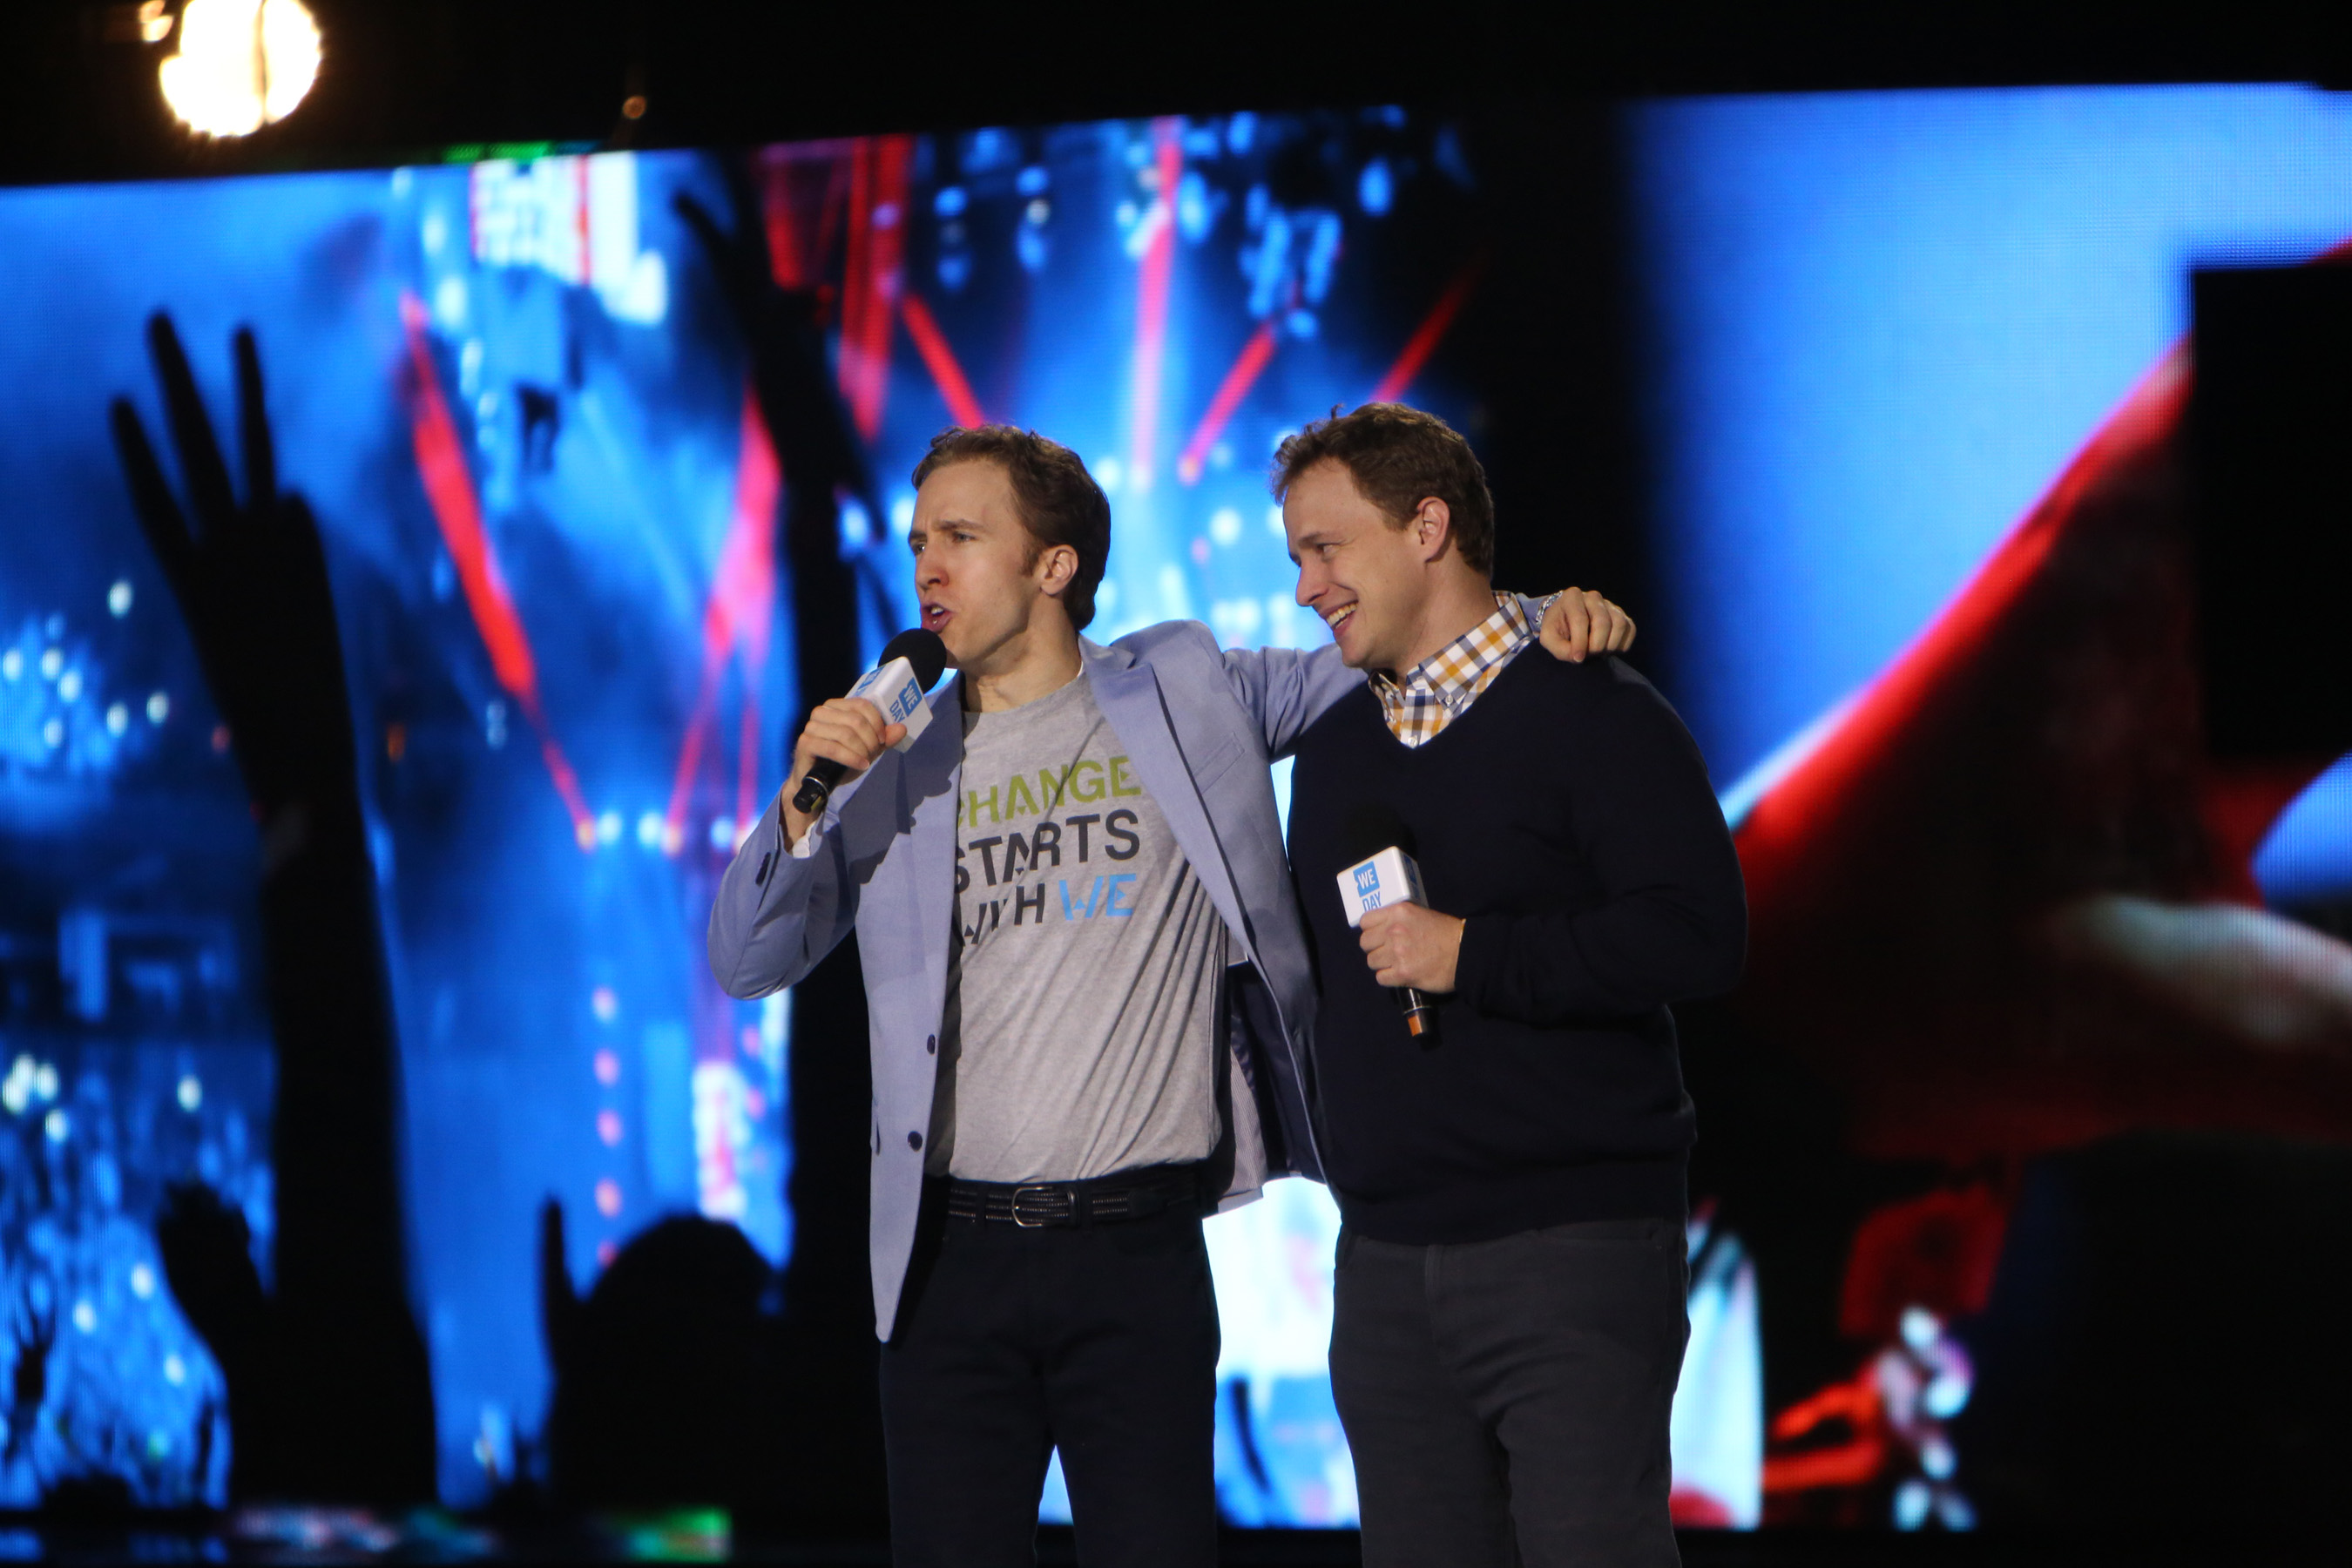  International activists and We Day co-founders, Craig & Marc Kielburger, inspire We Day crowd of young Americans to take action on local and global causes they care about. Photo Credit: Getty Images, Jeff Schear